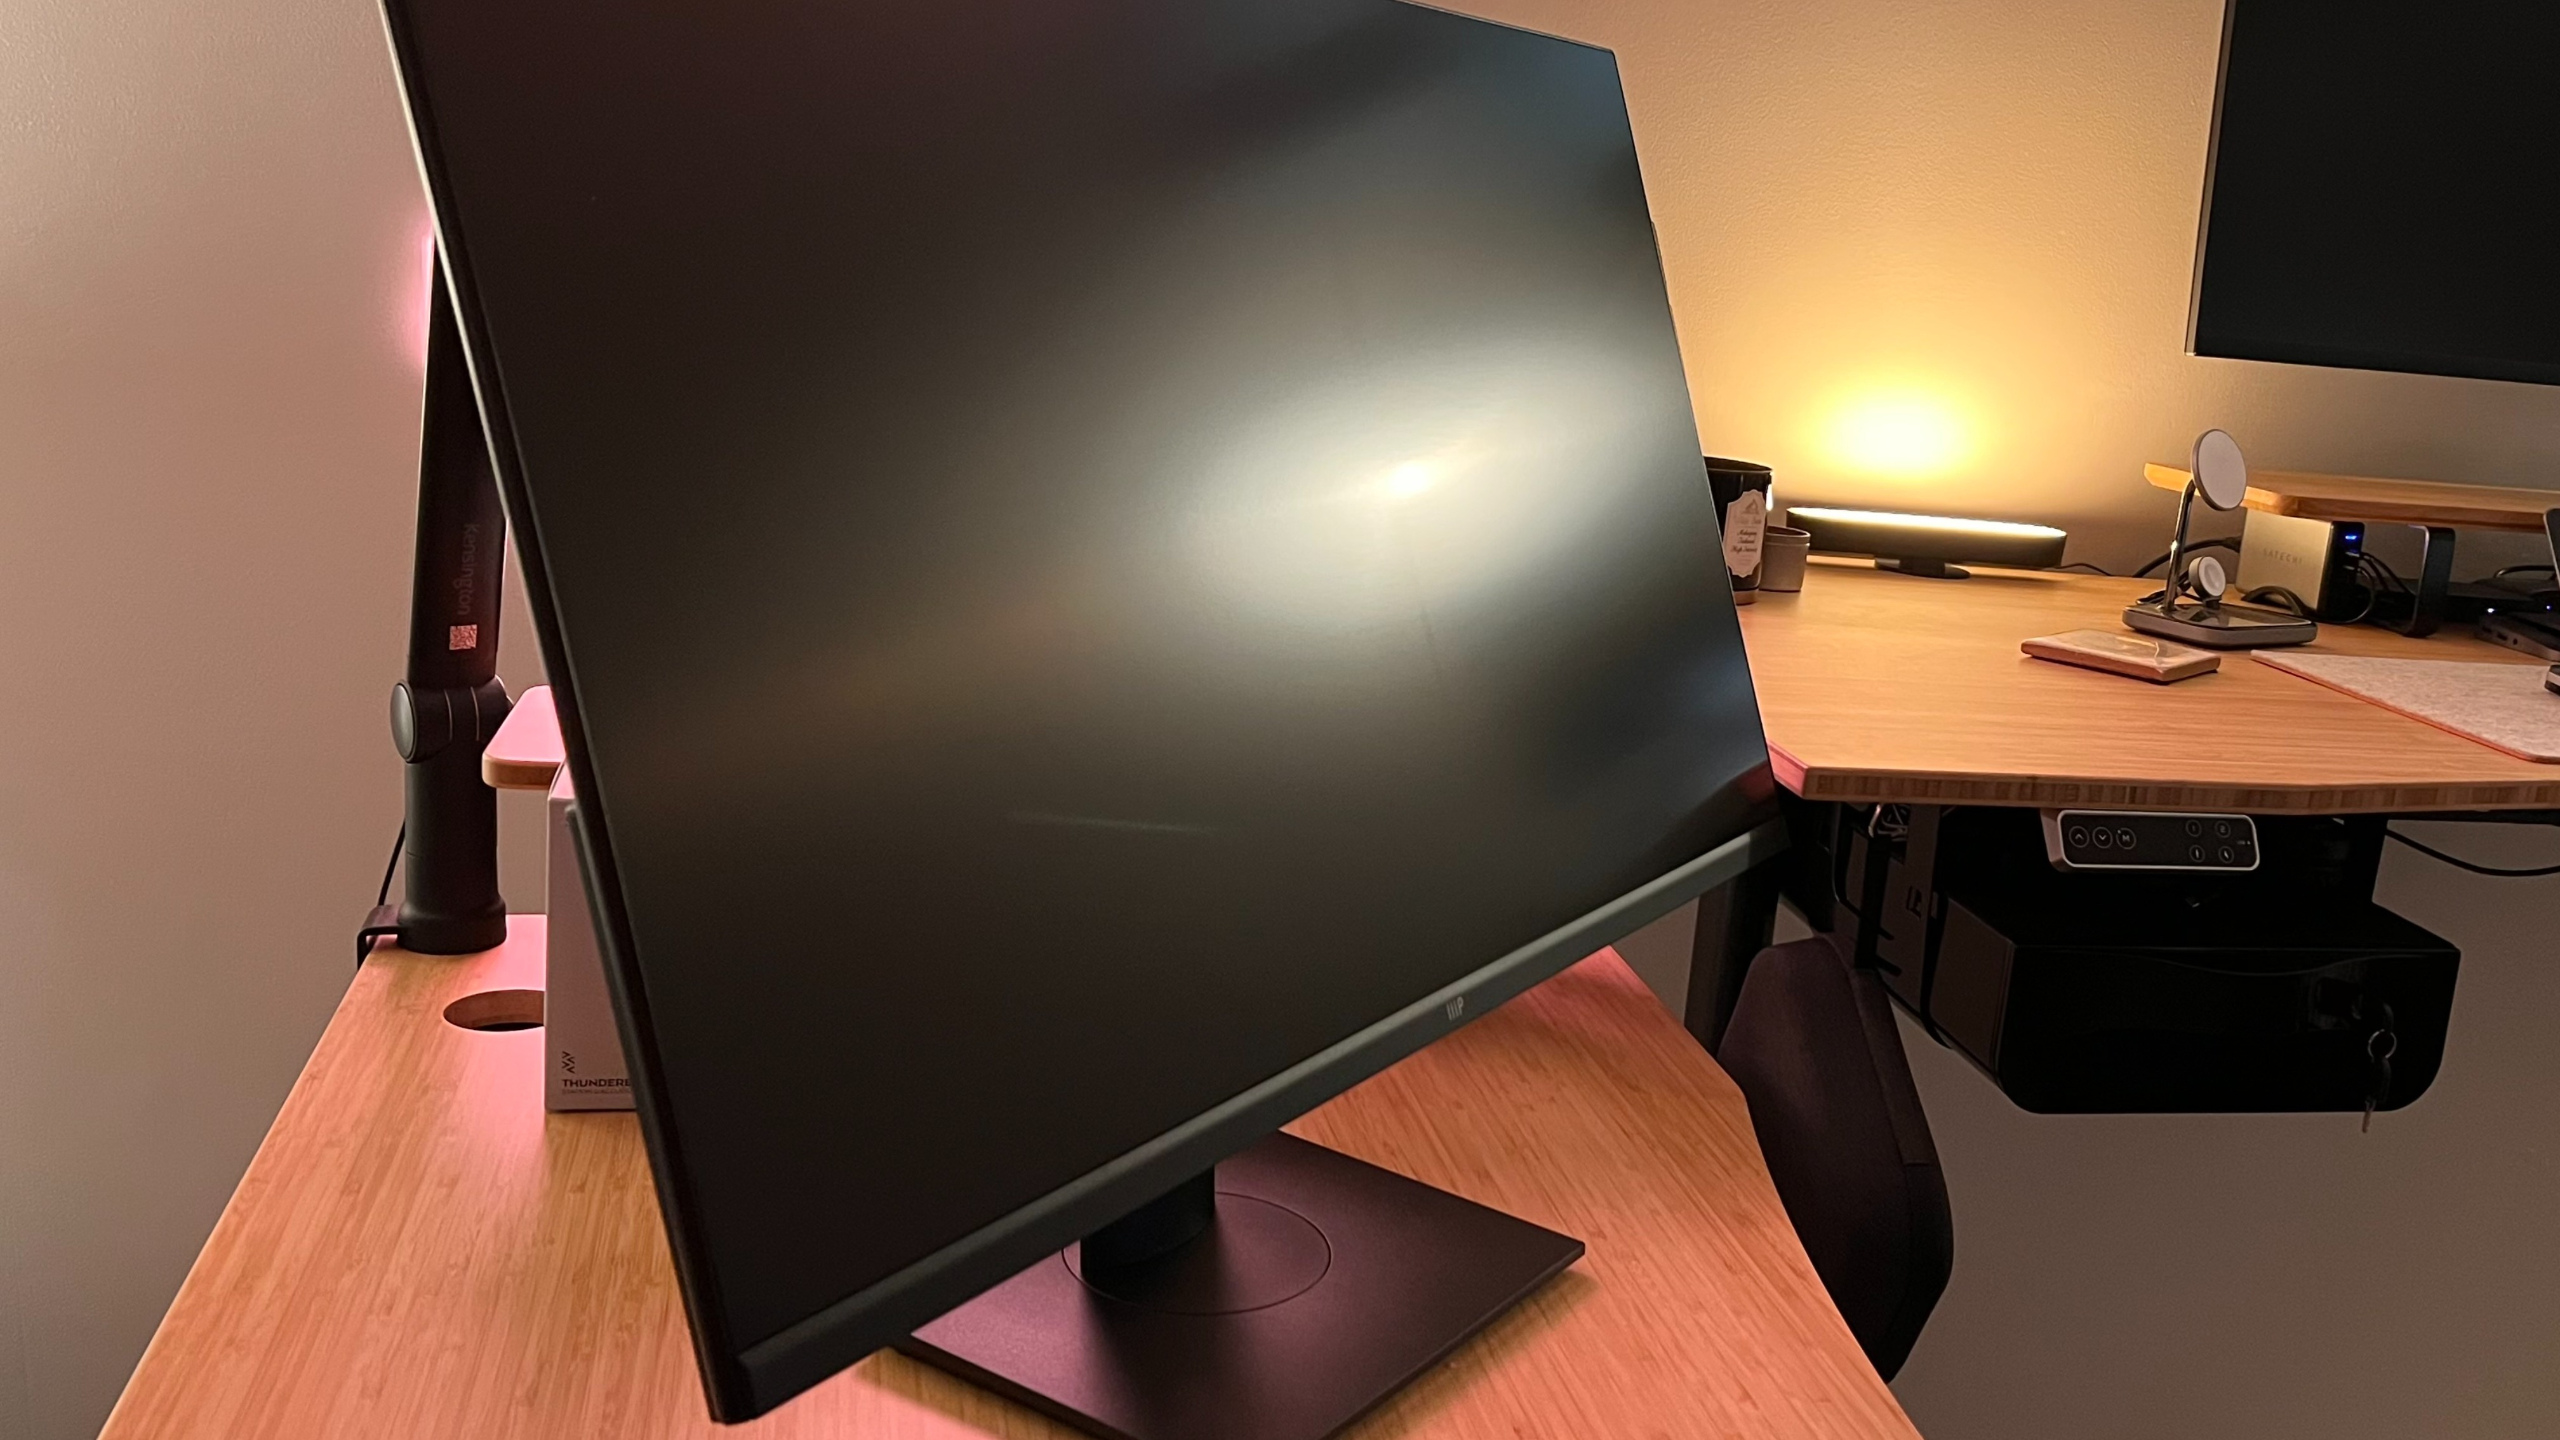 Monoprice 28-inch CrystalPro review: An affordable 4K USB-C monitor with  quirks